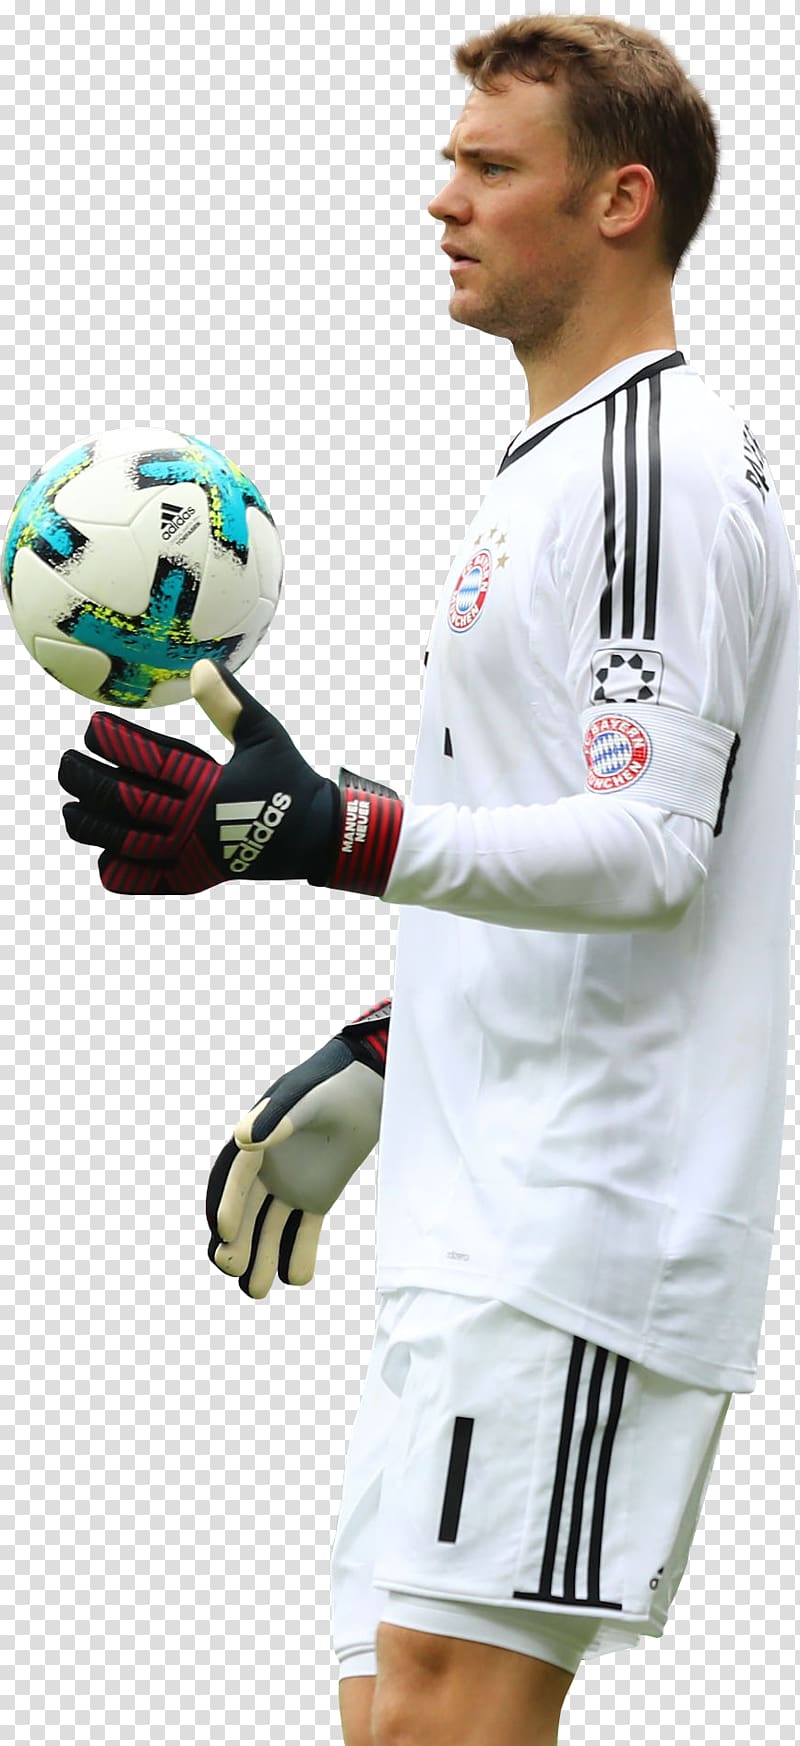 Manuel Neuer Football player Soccer player, others transparent background PNG clipart